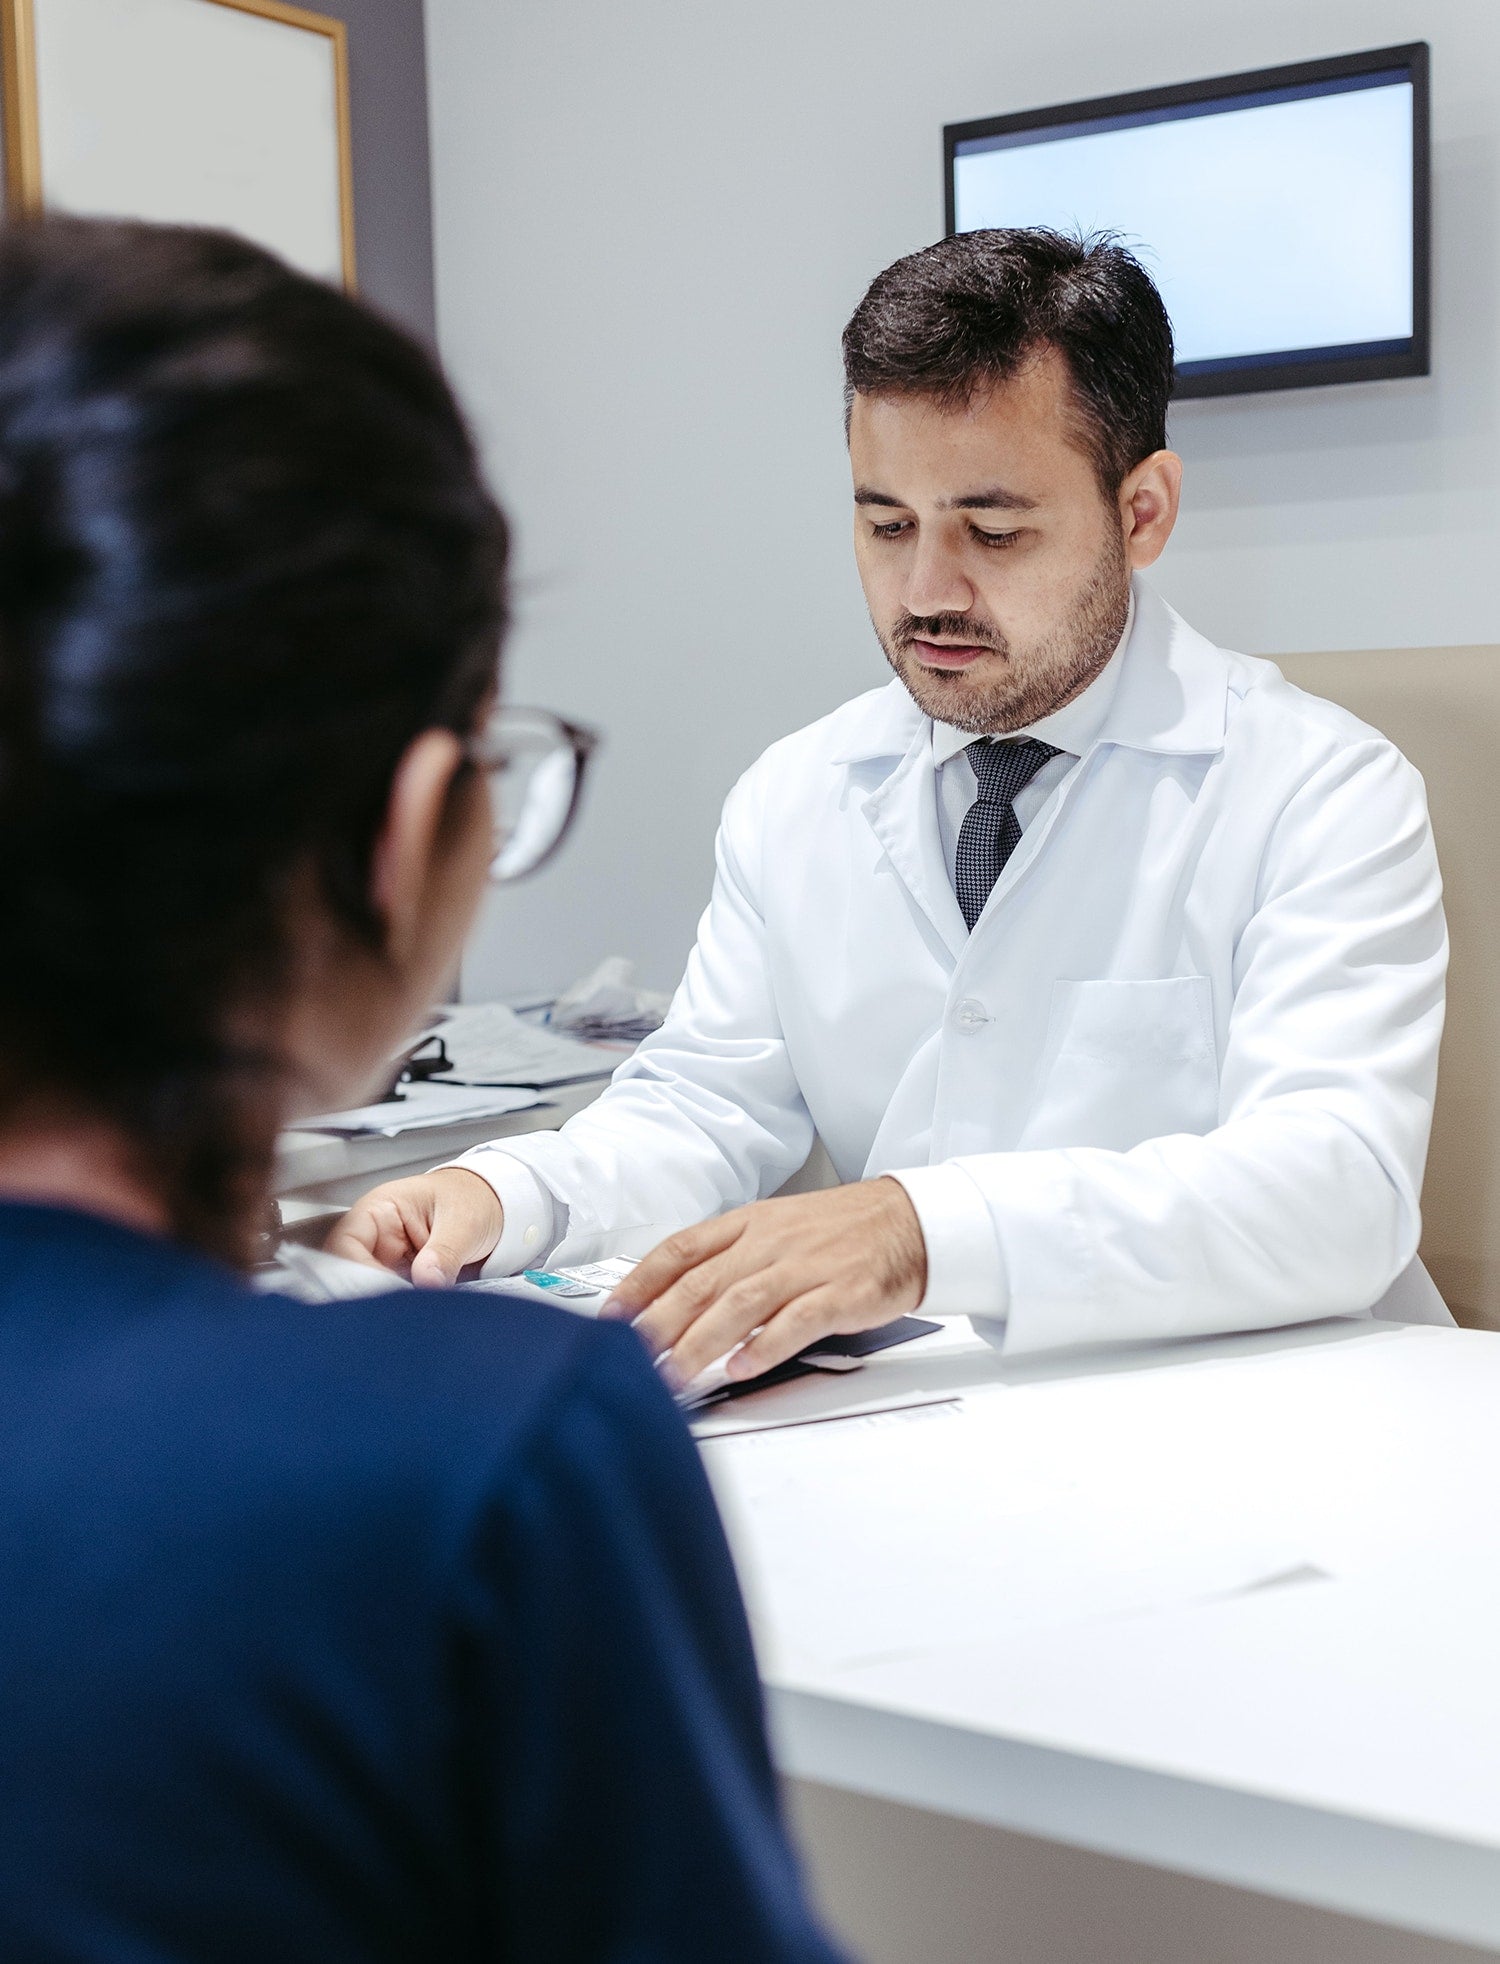 A doctor is talking to a patient in an office.